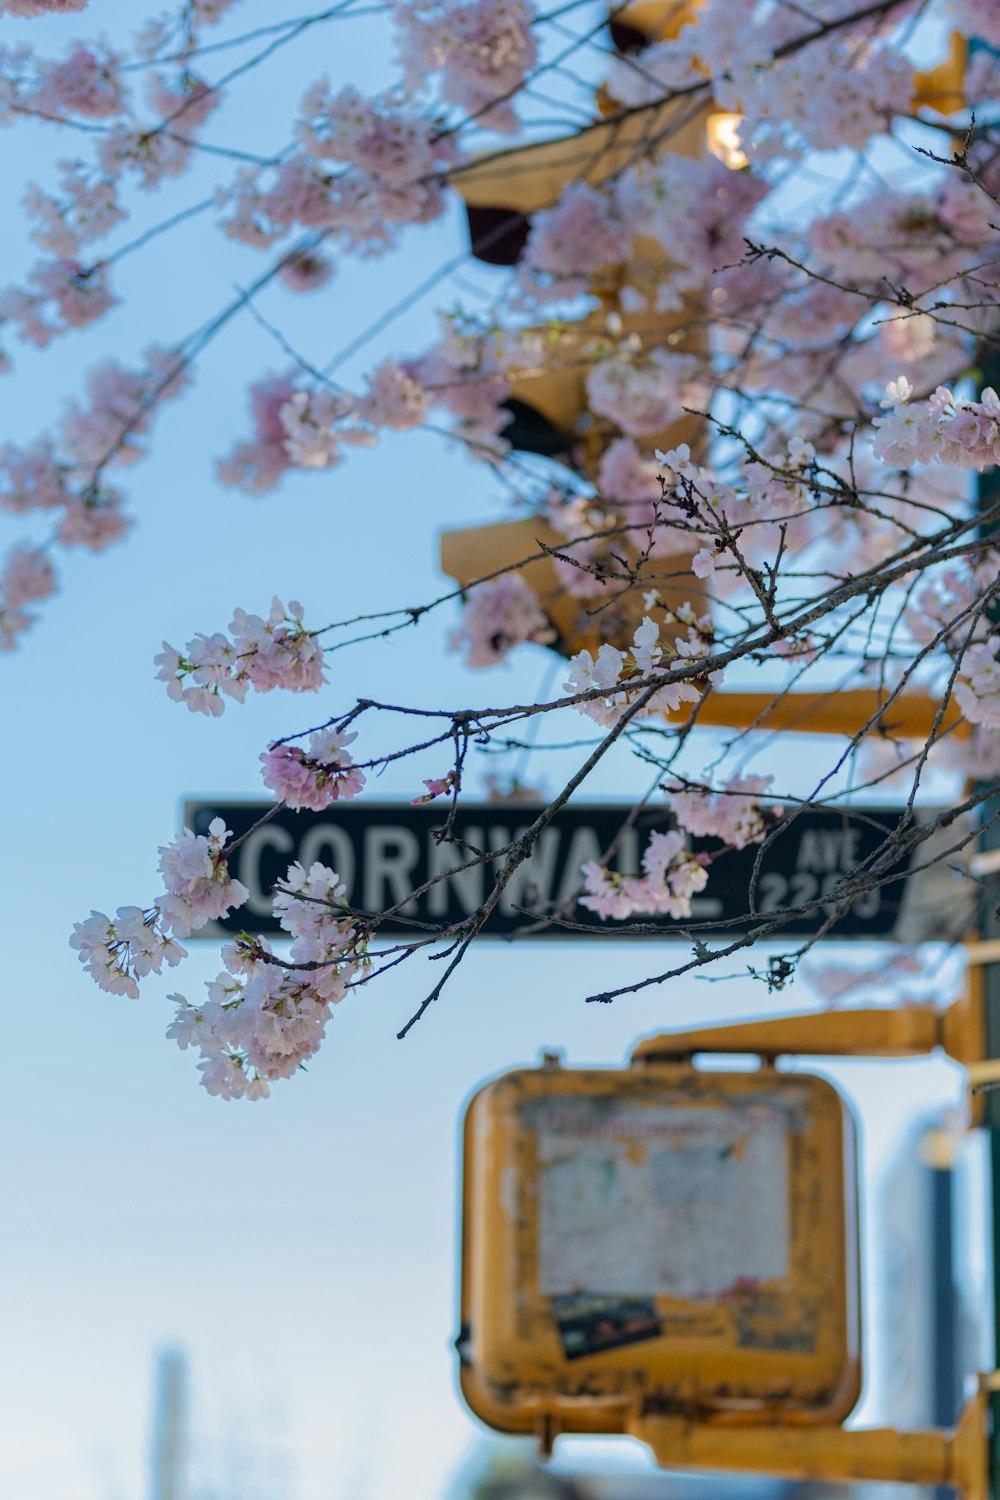 a street sign with a bunch of flowers on it